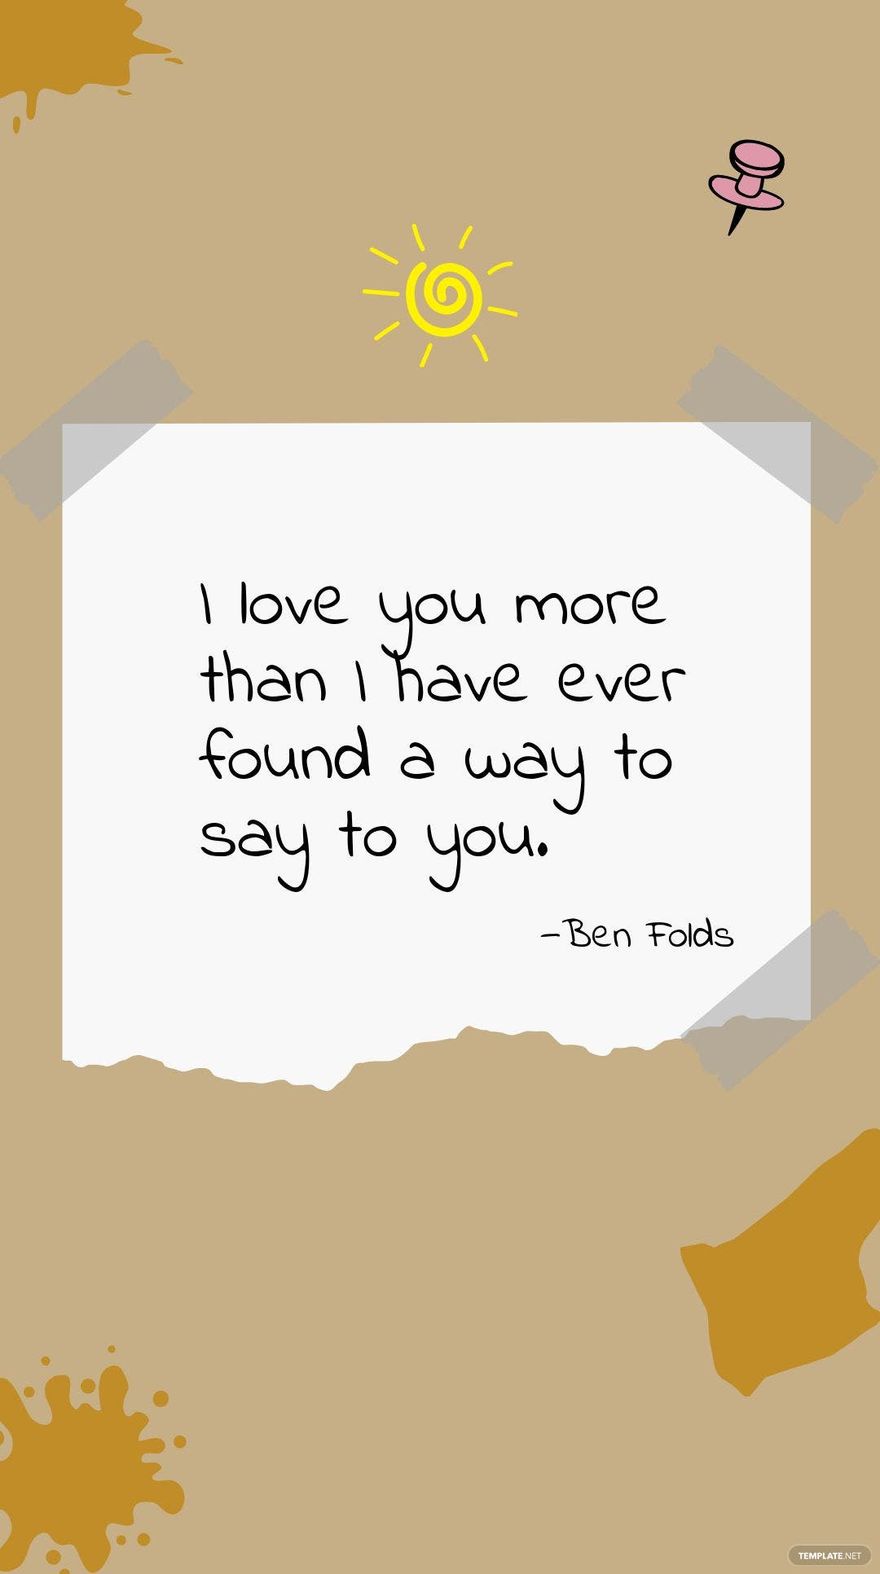 Ben Folds - “I love you more than I have ever found a way to say to you.”